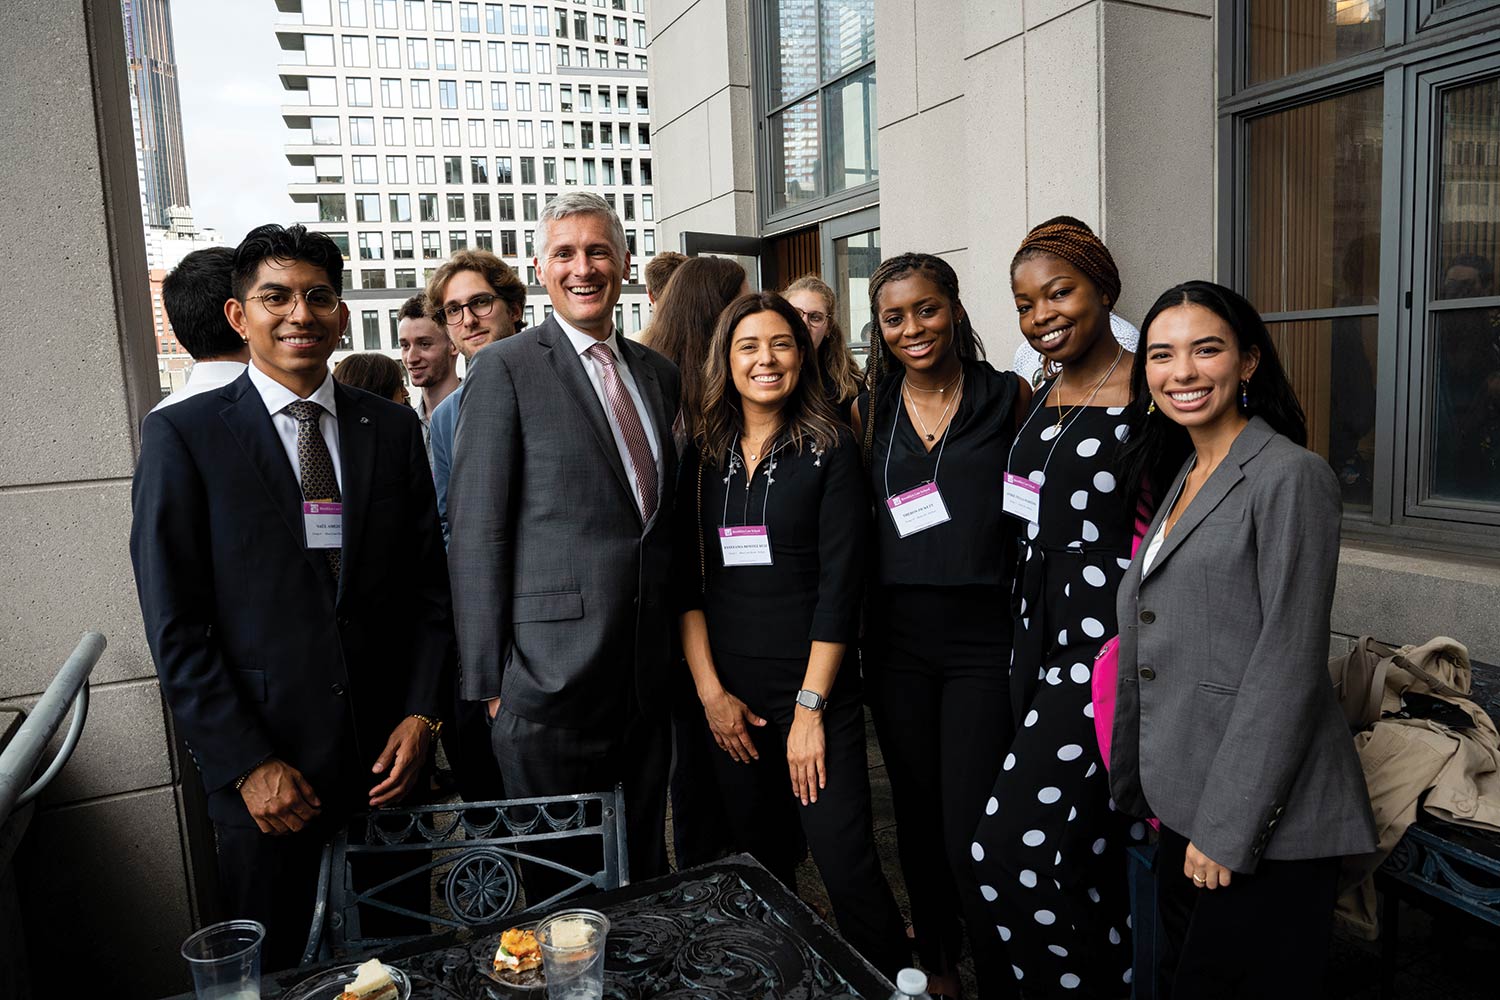 A photograph of Michael T. Cahill (President, Joseph Crea Dean, and Professor of Law at Brooklyn Law School) smiling and posing alongside students